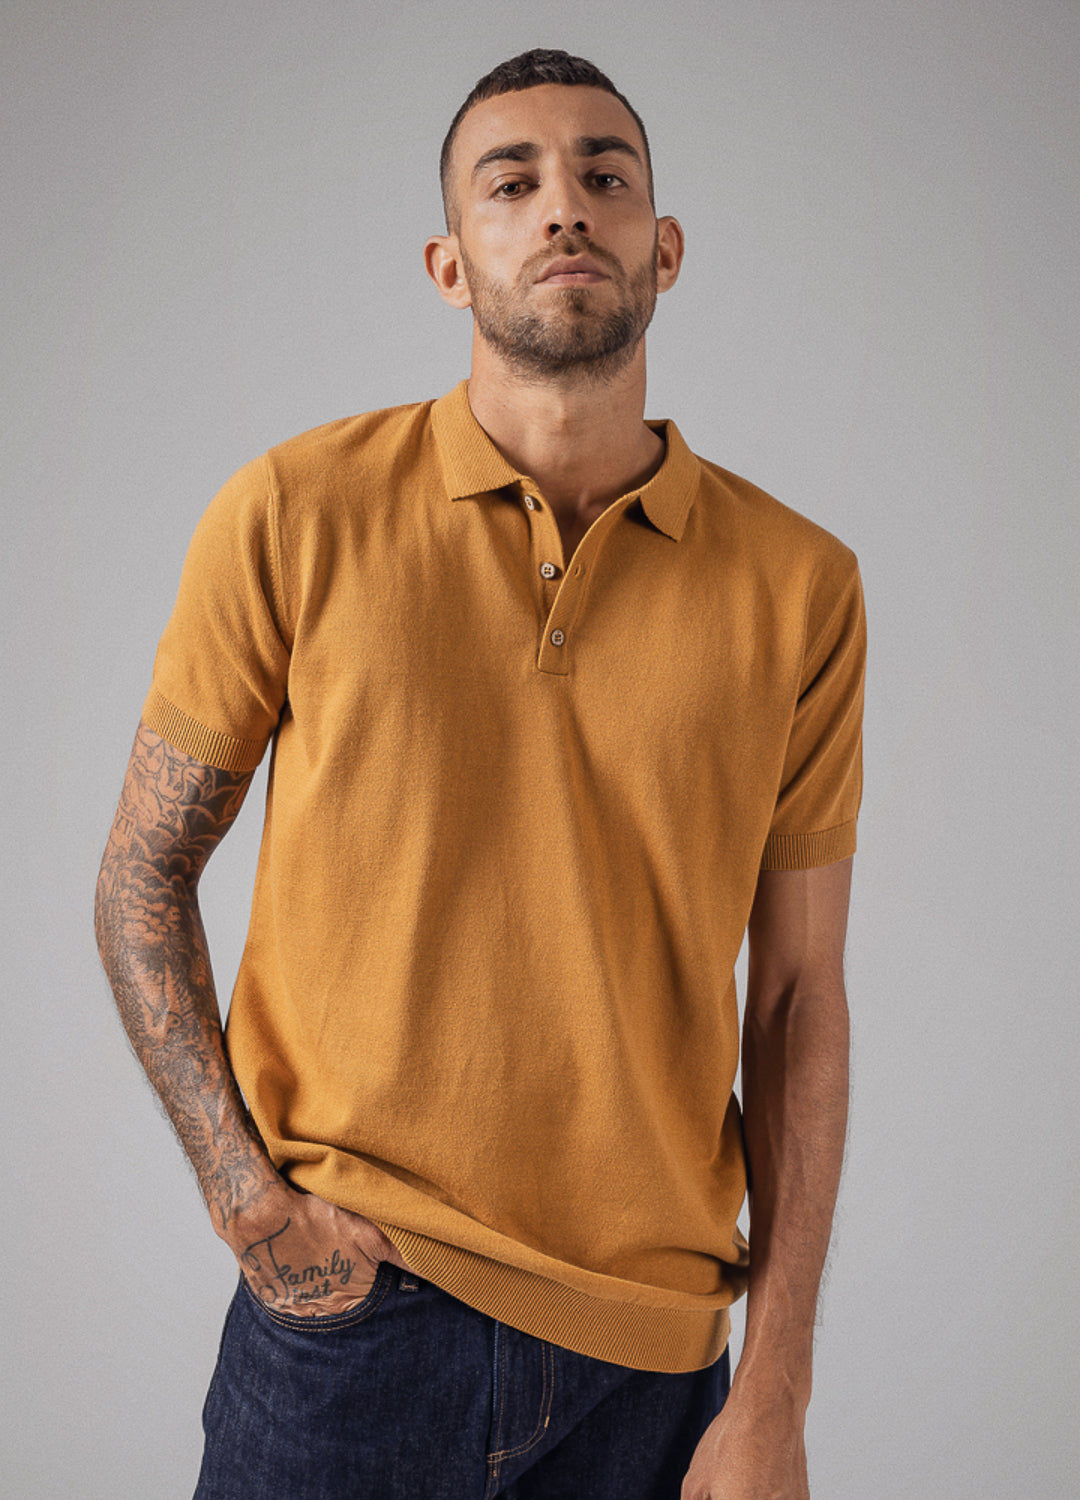 Almond Orange Knitted Sustainable Organic Cotton Polo Neck T Shirt For Men Online